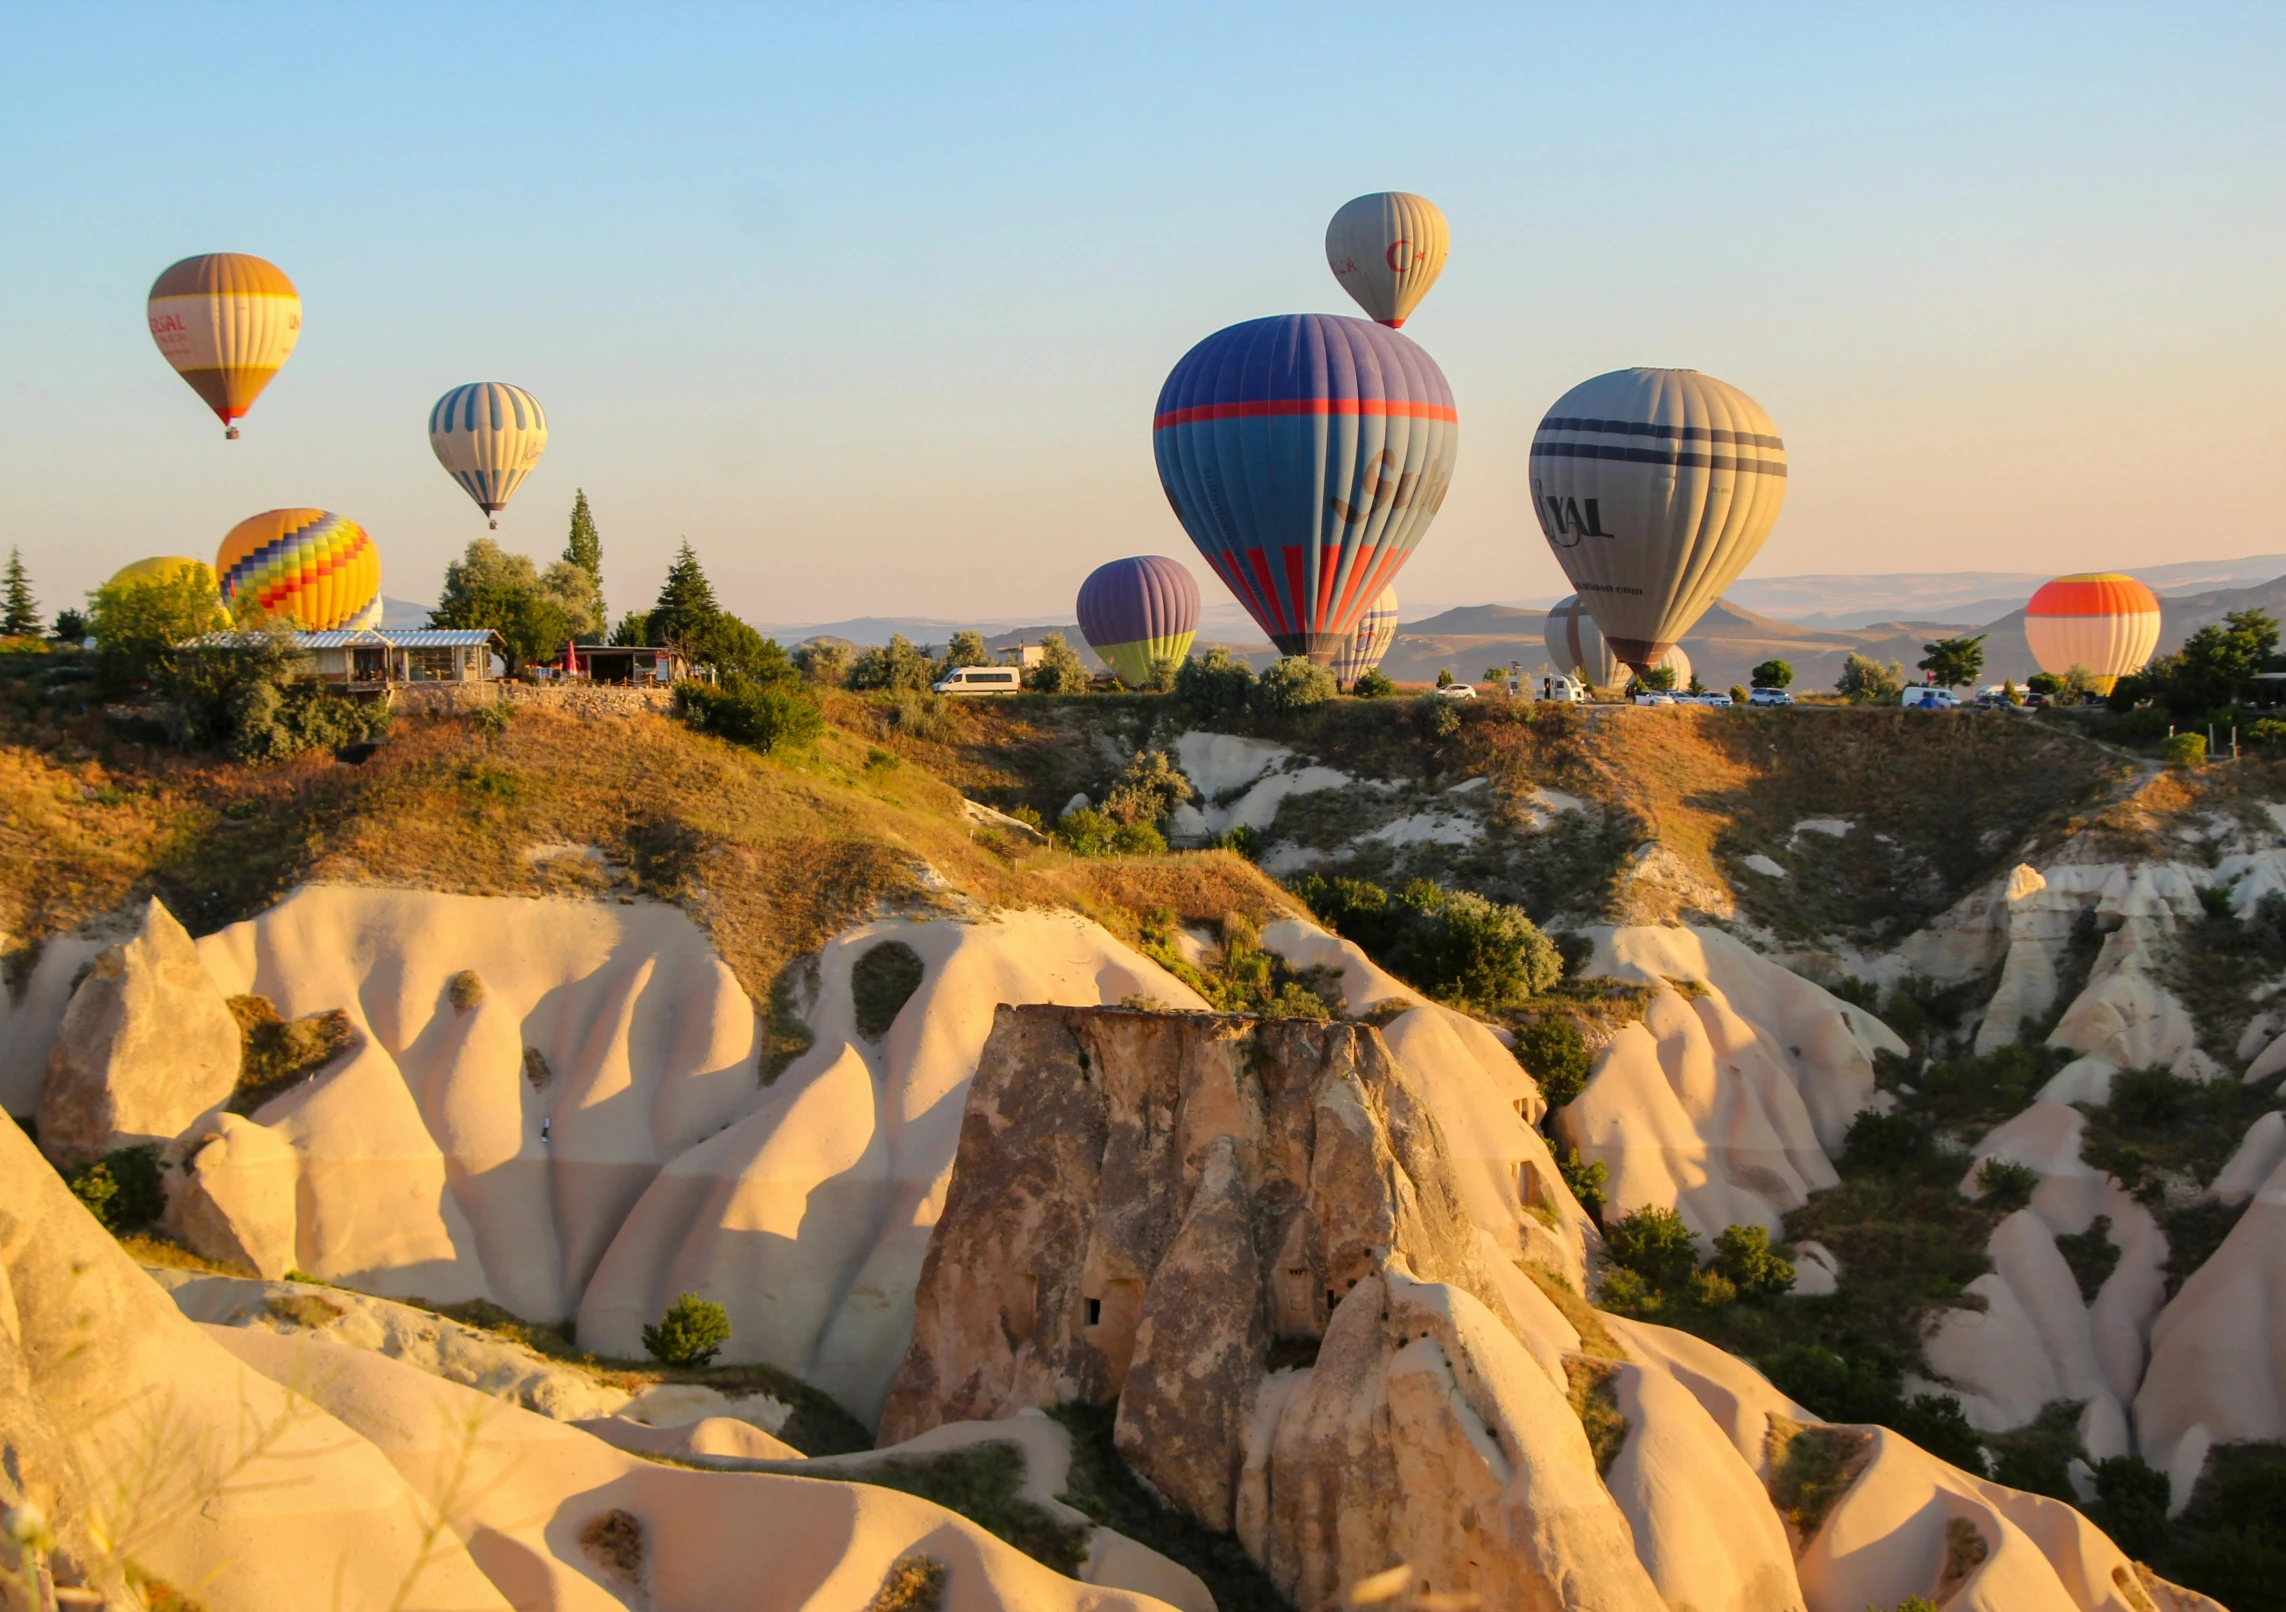  air balloons fill the sky above rock formations